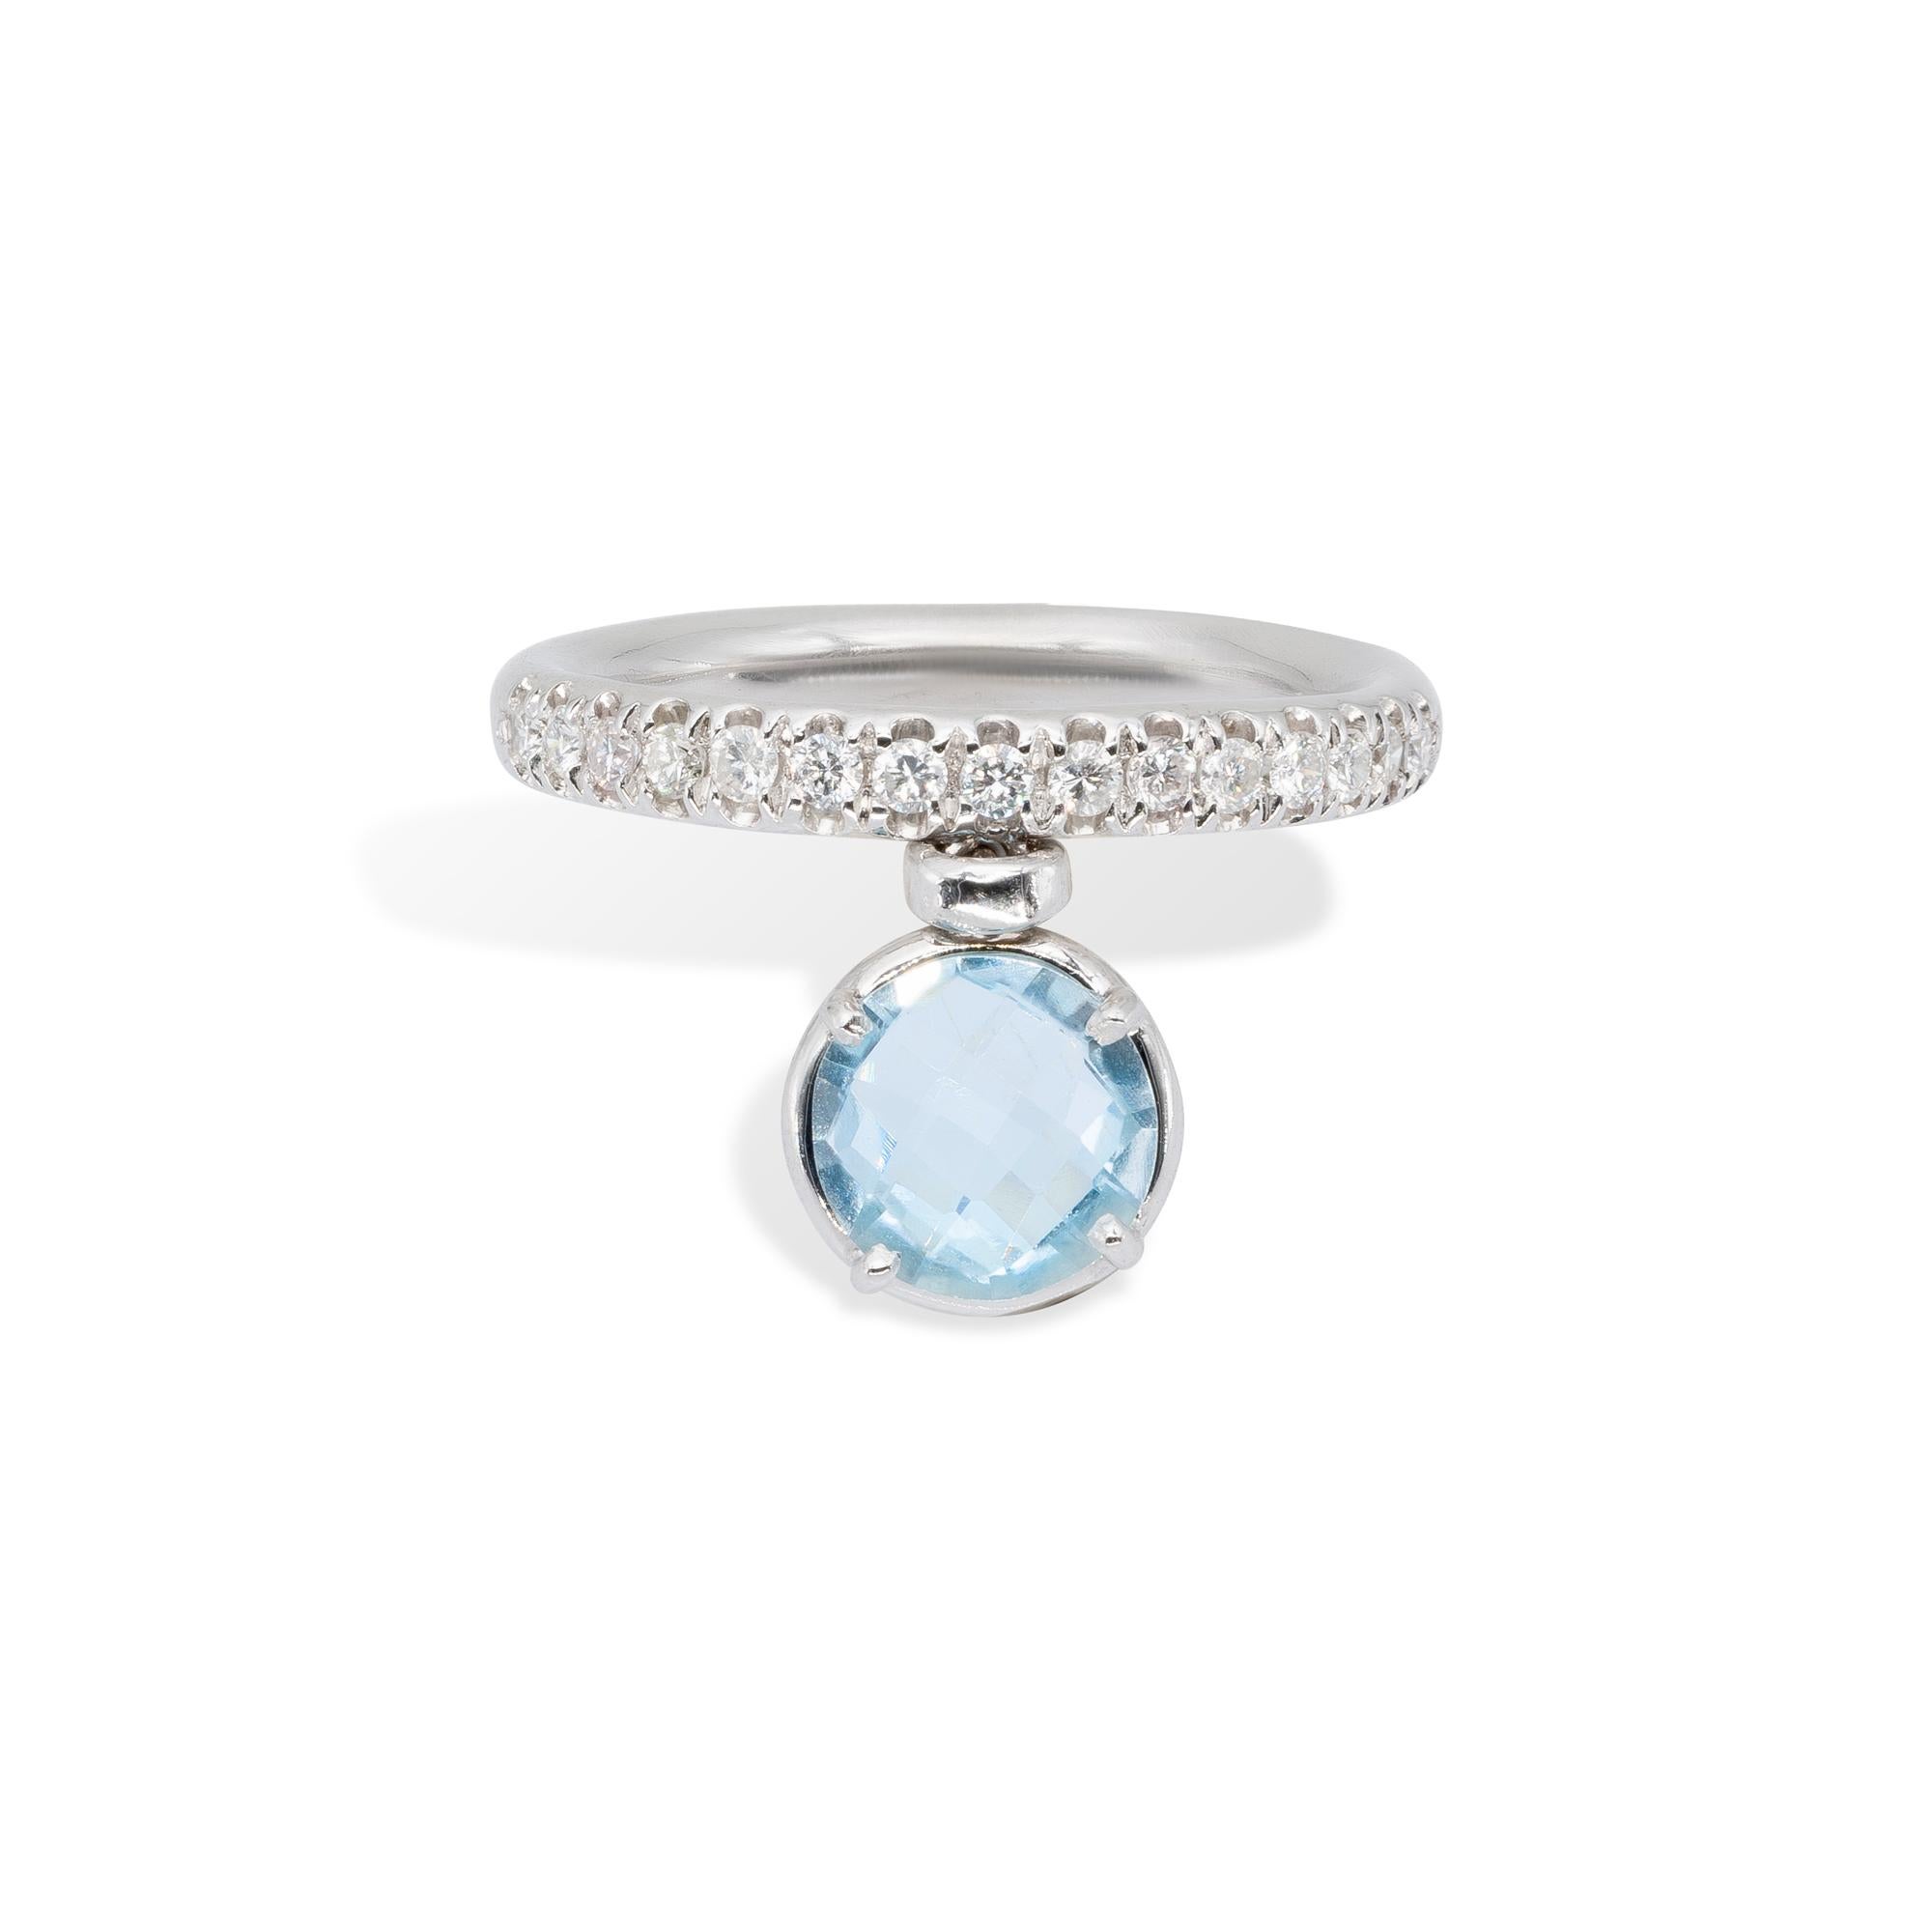 d'Avossa Ring in white 18 kt gold with a pendant round-briolé cut Blue Topaz 1,97 cts and white diamonds G color, VVS1 clarity 0,27 cts.


Ref. Number ATO741

